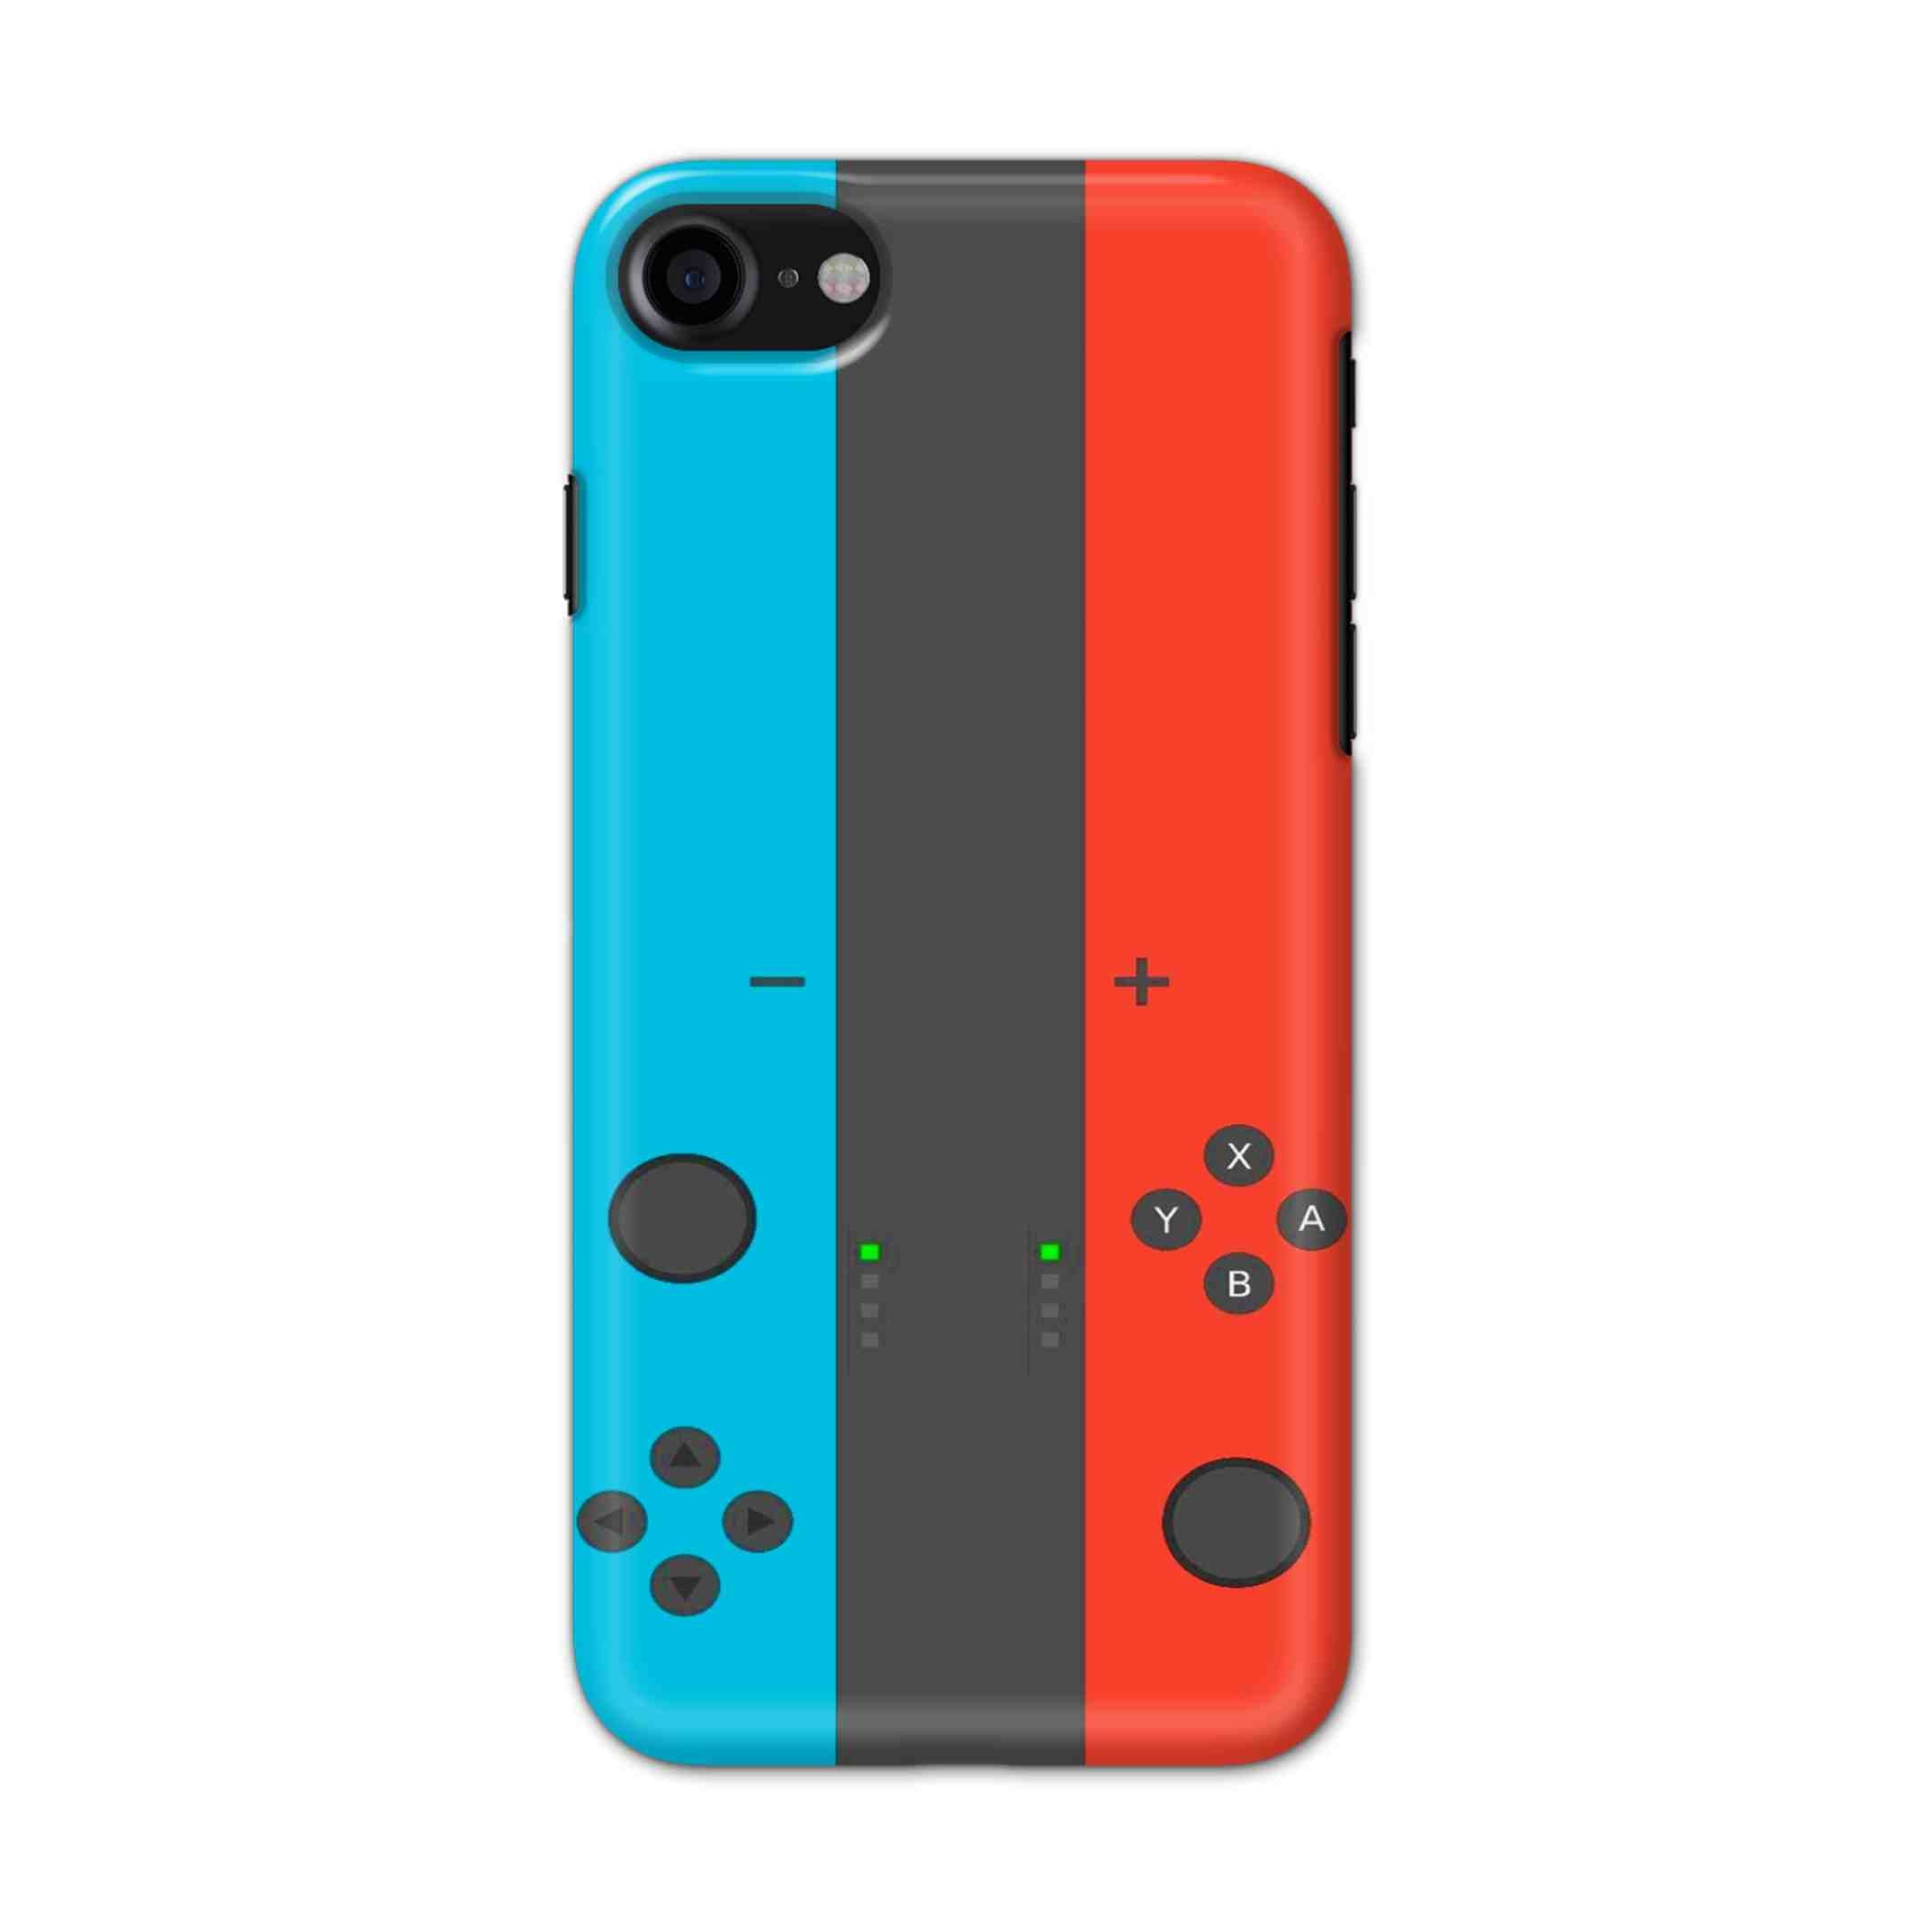 Buy Gamepad Hard Back Mobile Phone Case/Cover For iPhone 7 / 8 Online